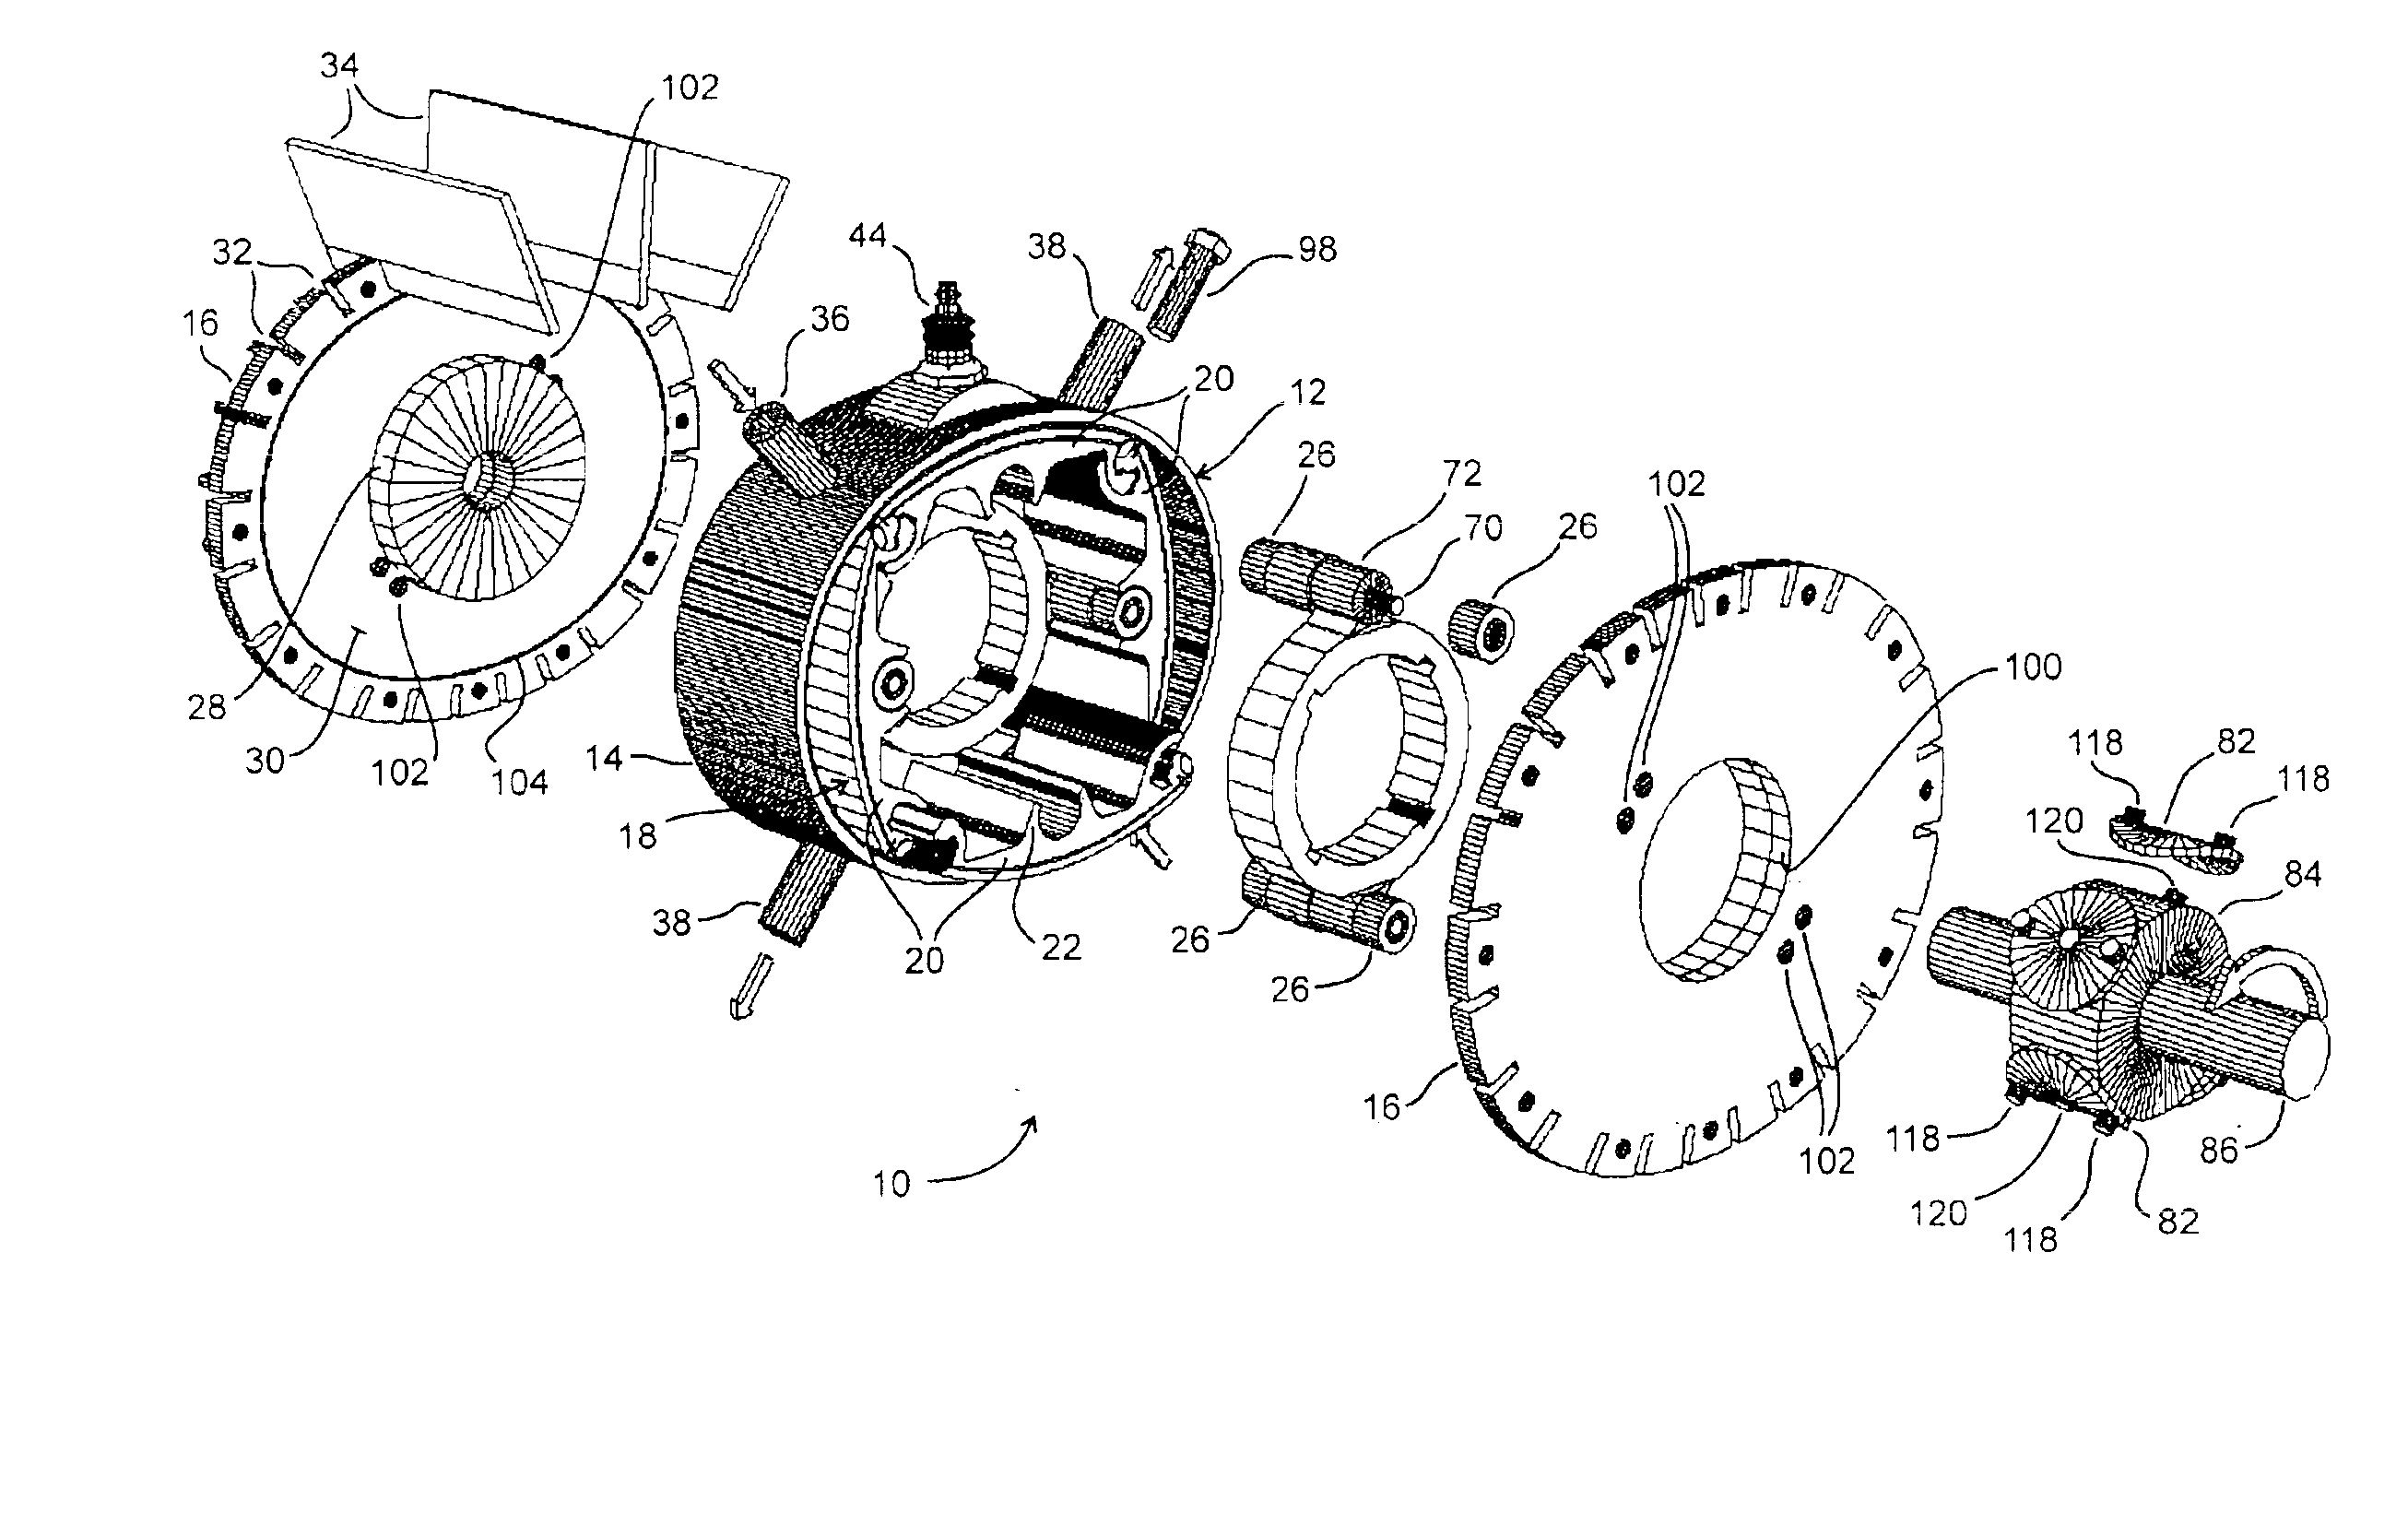 Quasiturbine (Qurbine) rotor with central annular support and ventilation